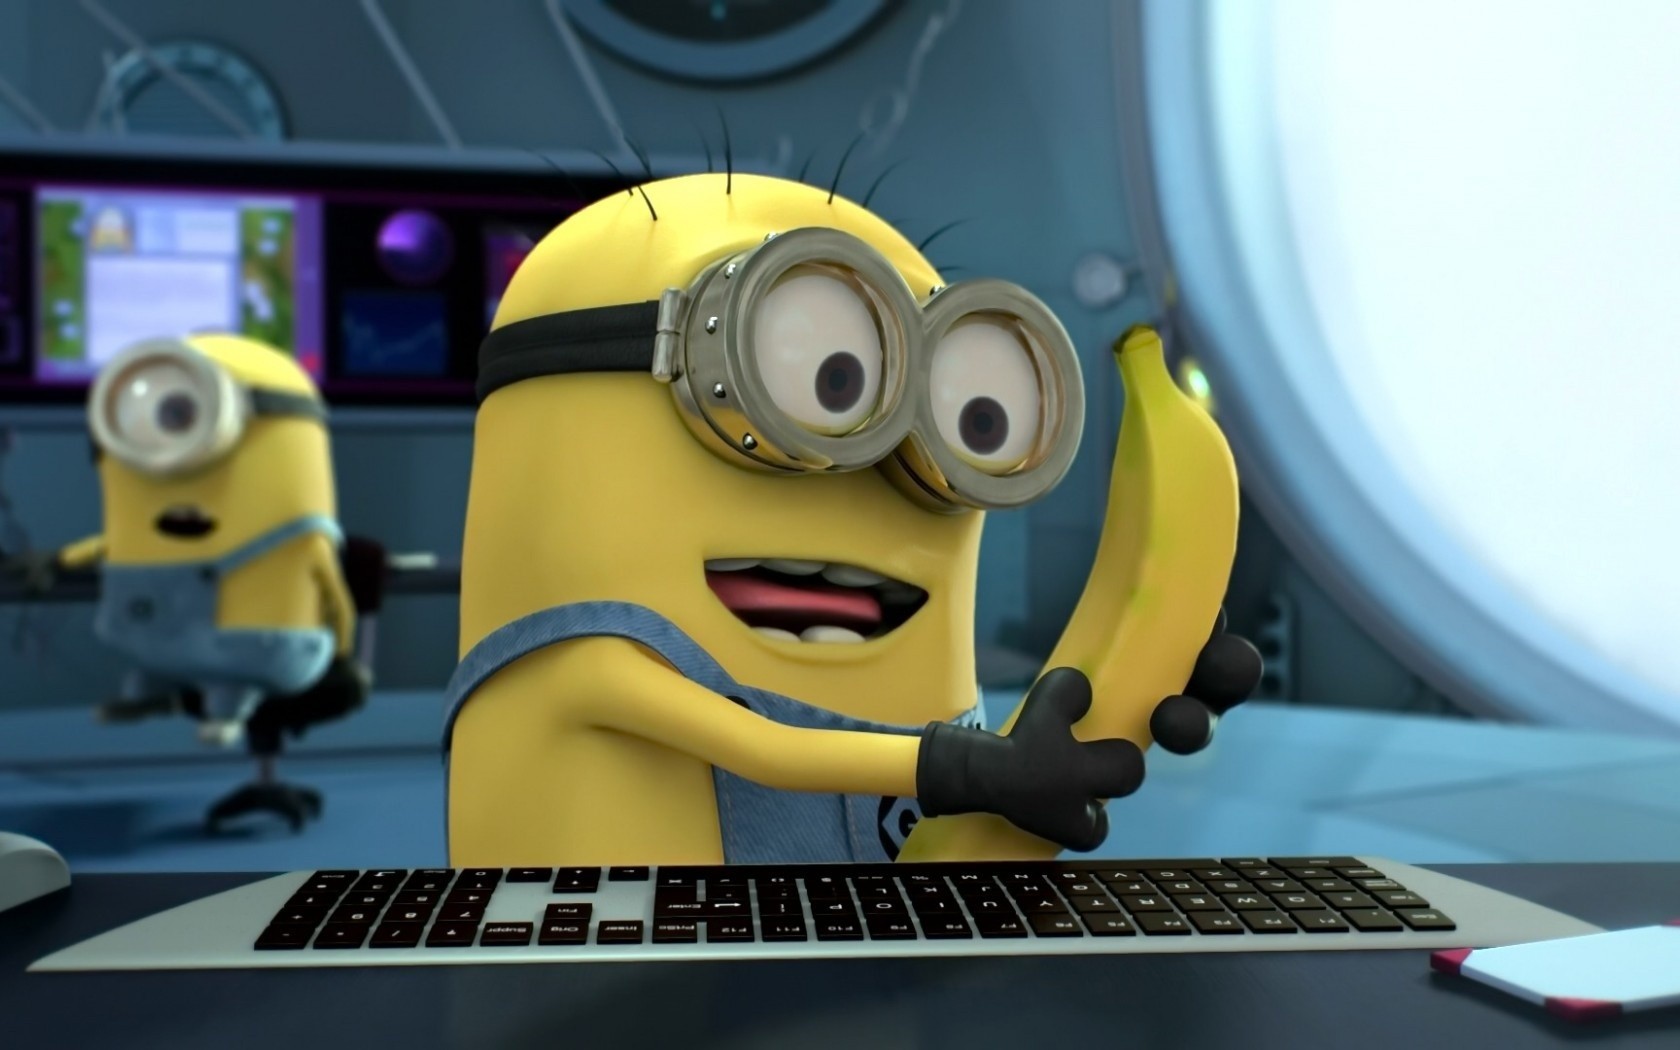 General 1680x1050 minions Despicable Me movies bananas keyboards animated movies food fruit